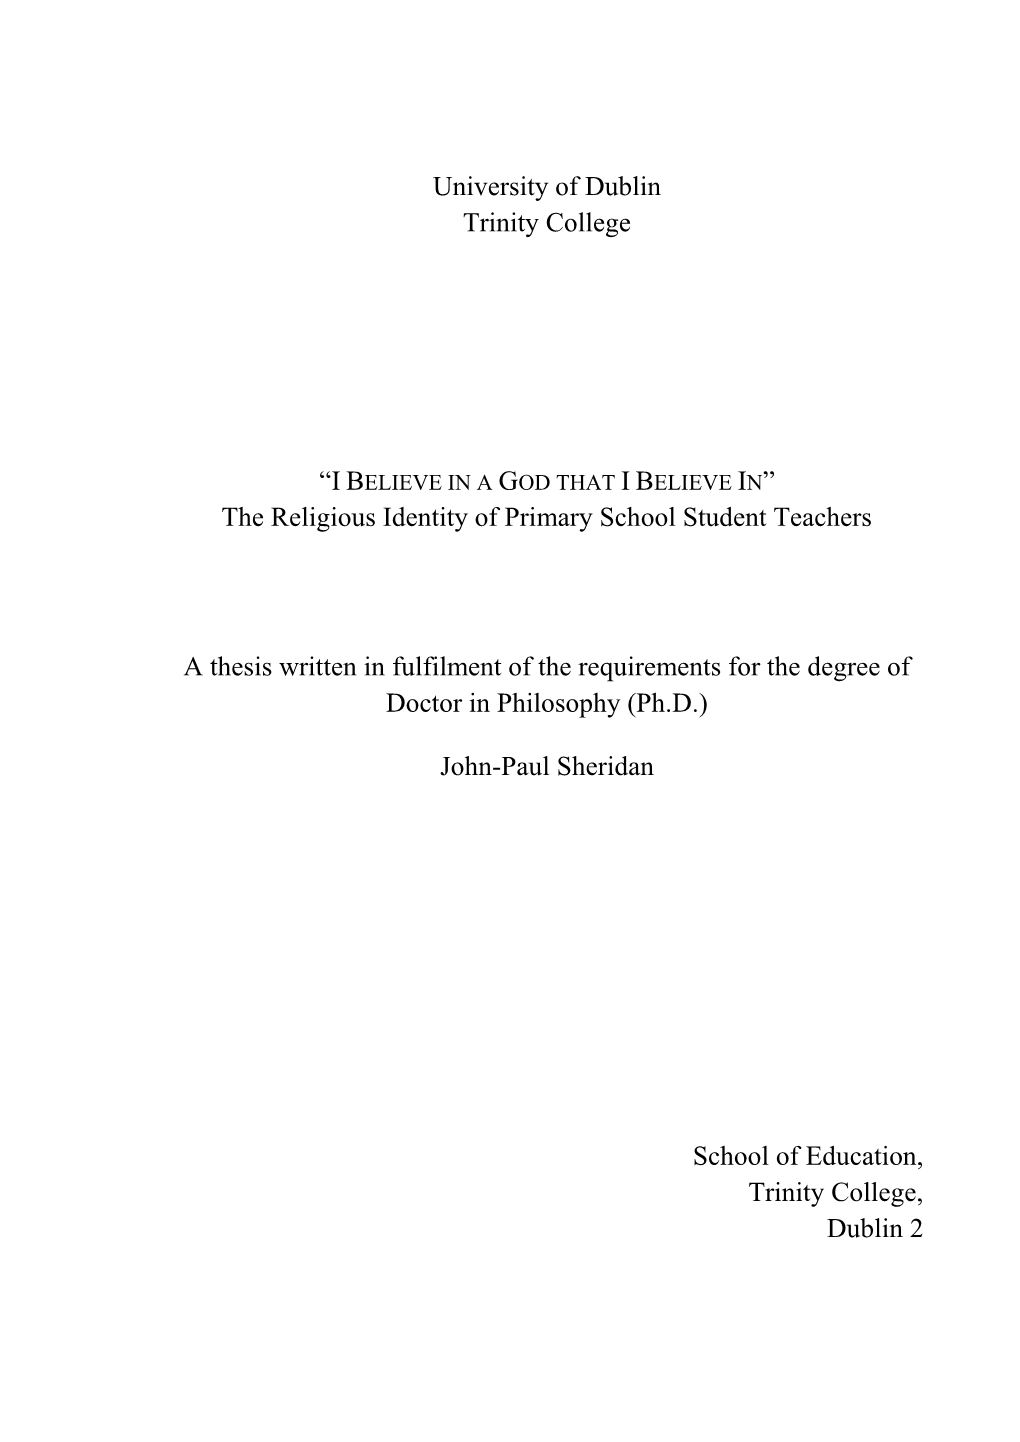 University of Dublin Trinity College the Religious Identity of Primary School Student Teachers a Thesis Written in Fulfilment Of